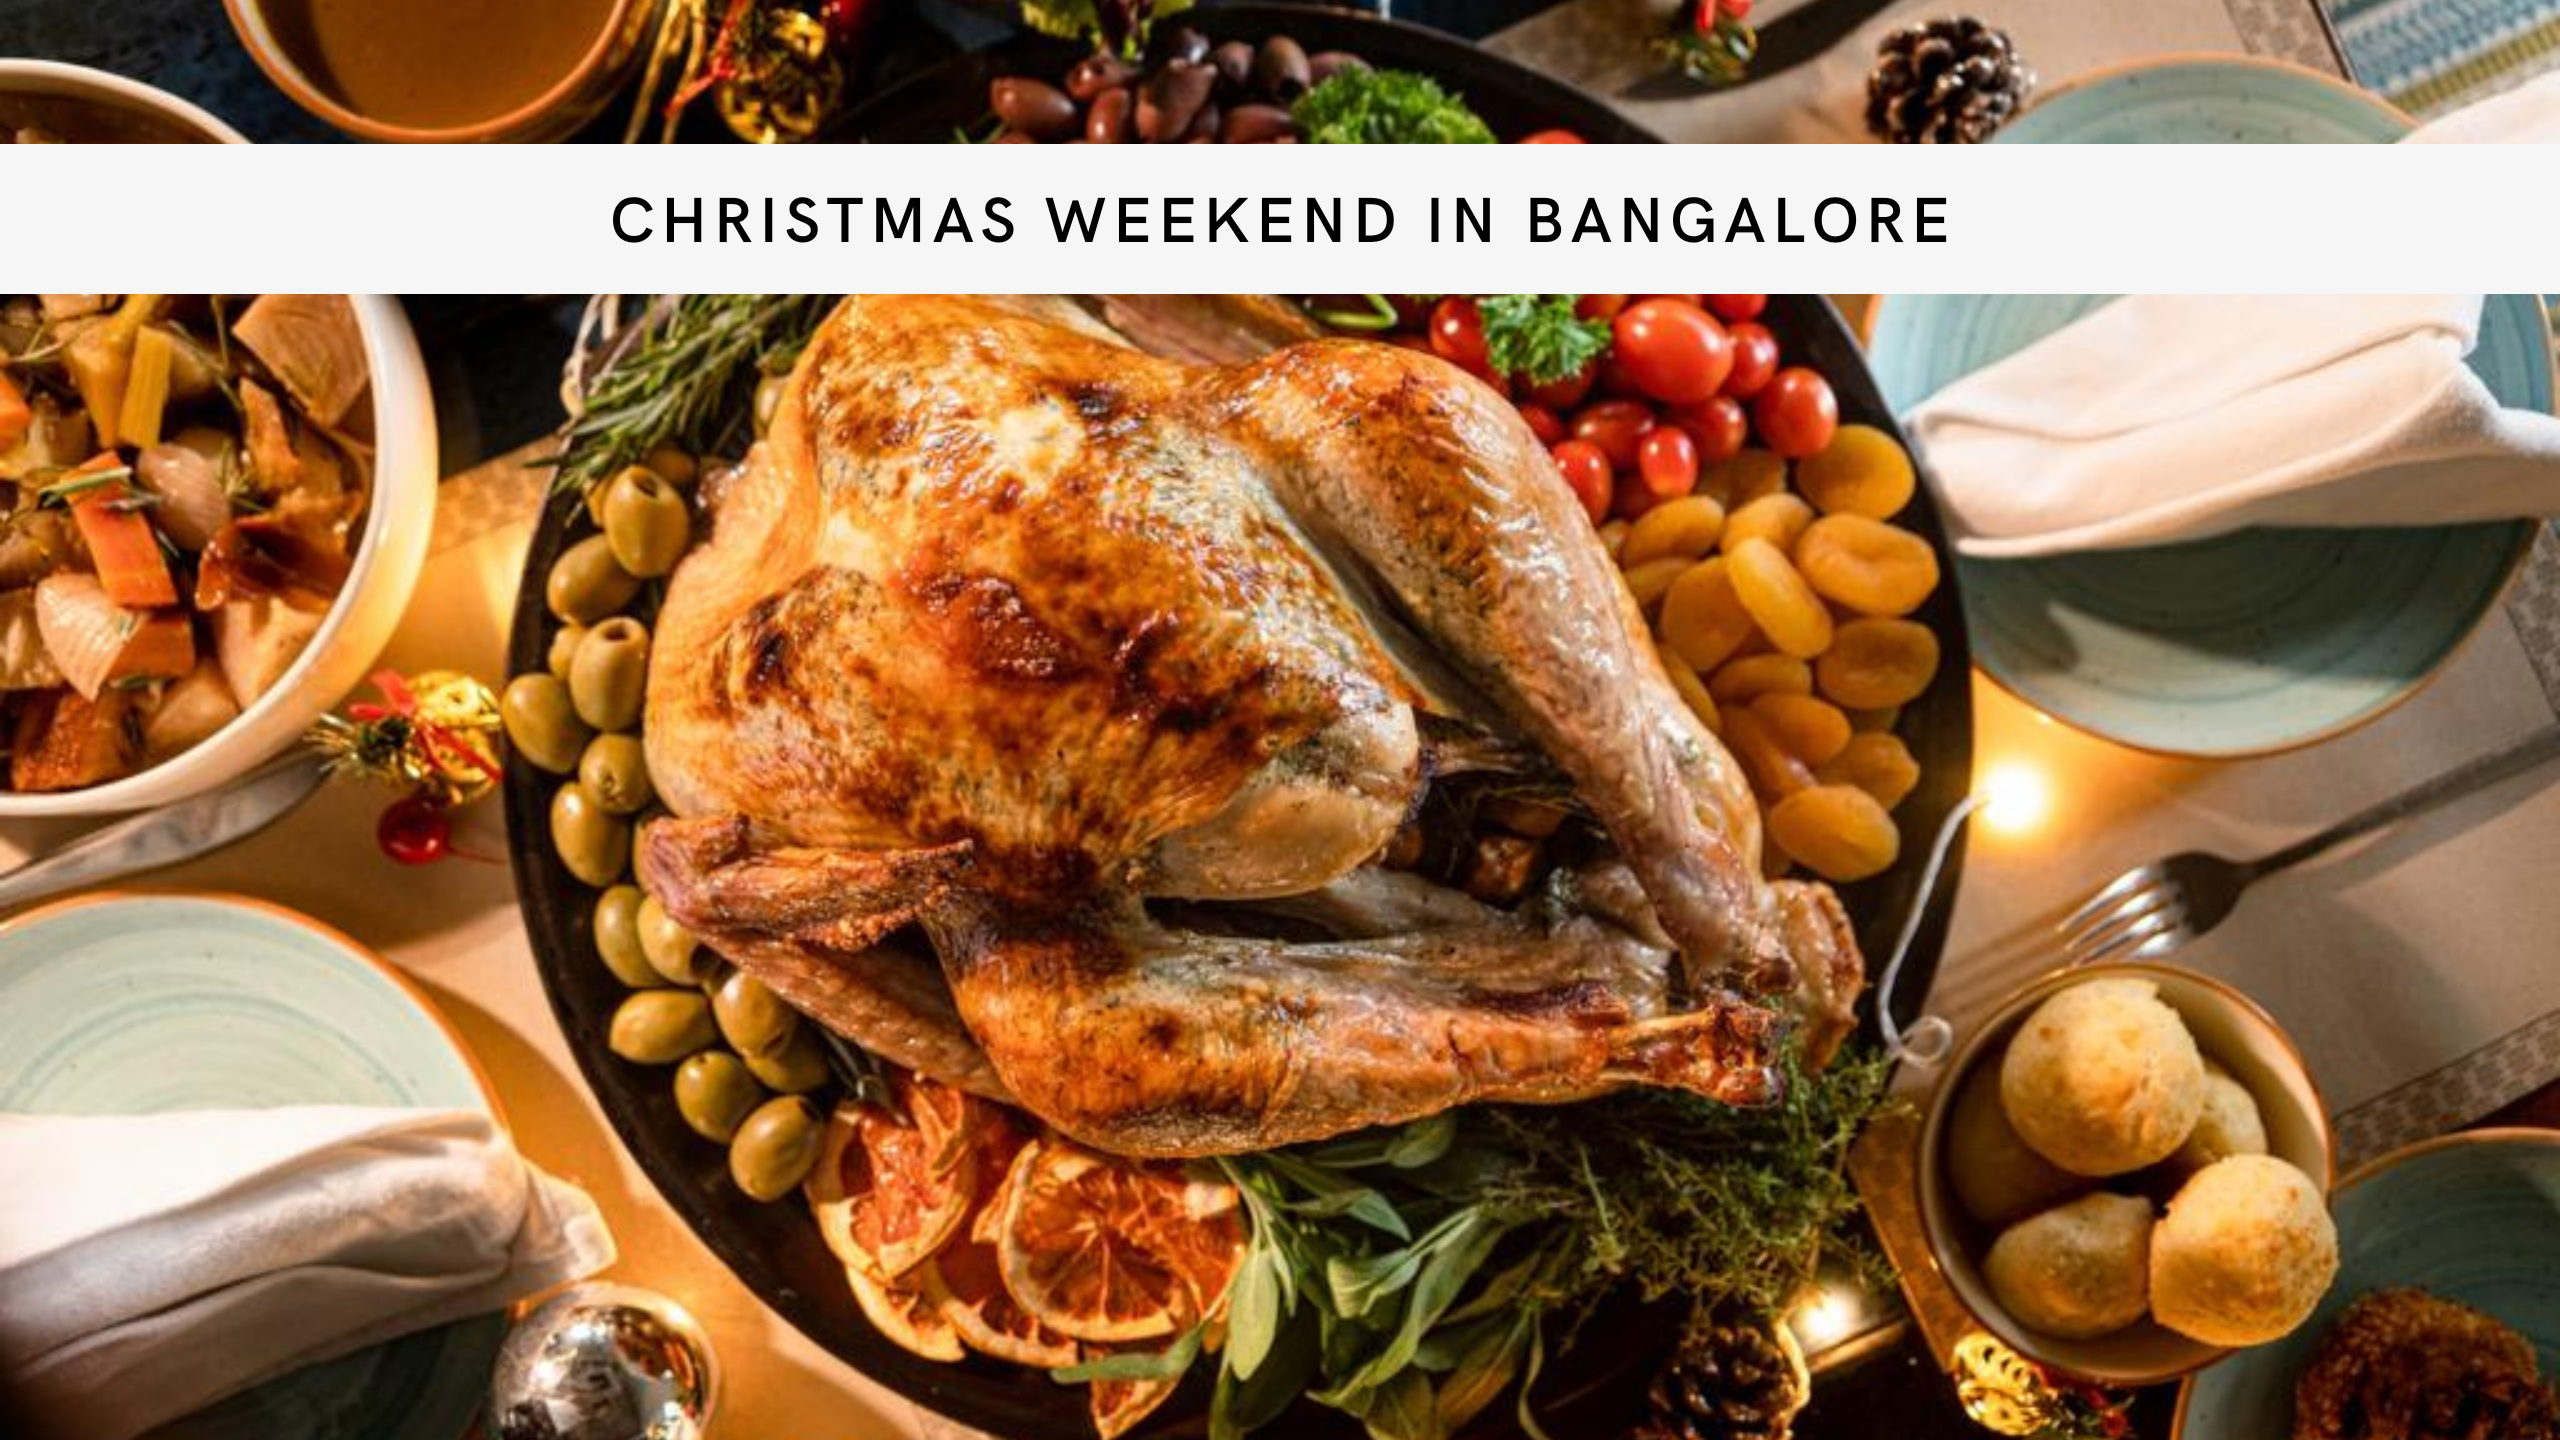 Christmas Specials In Bangalore - She Knows Grub - Food & Travel